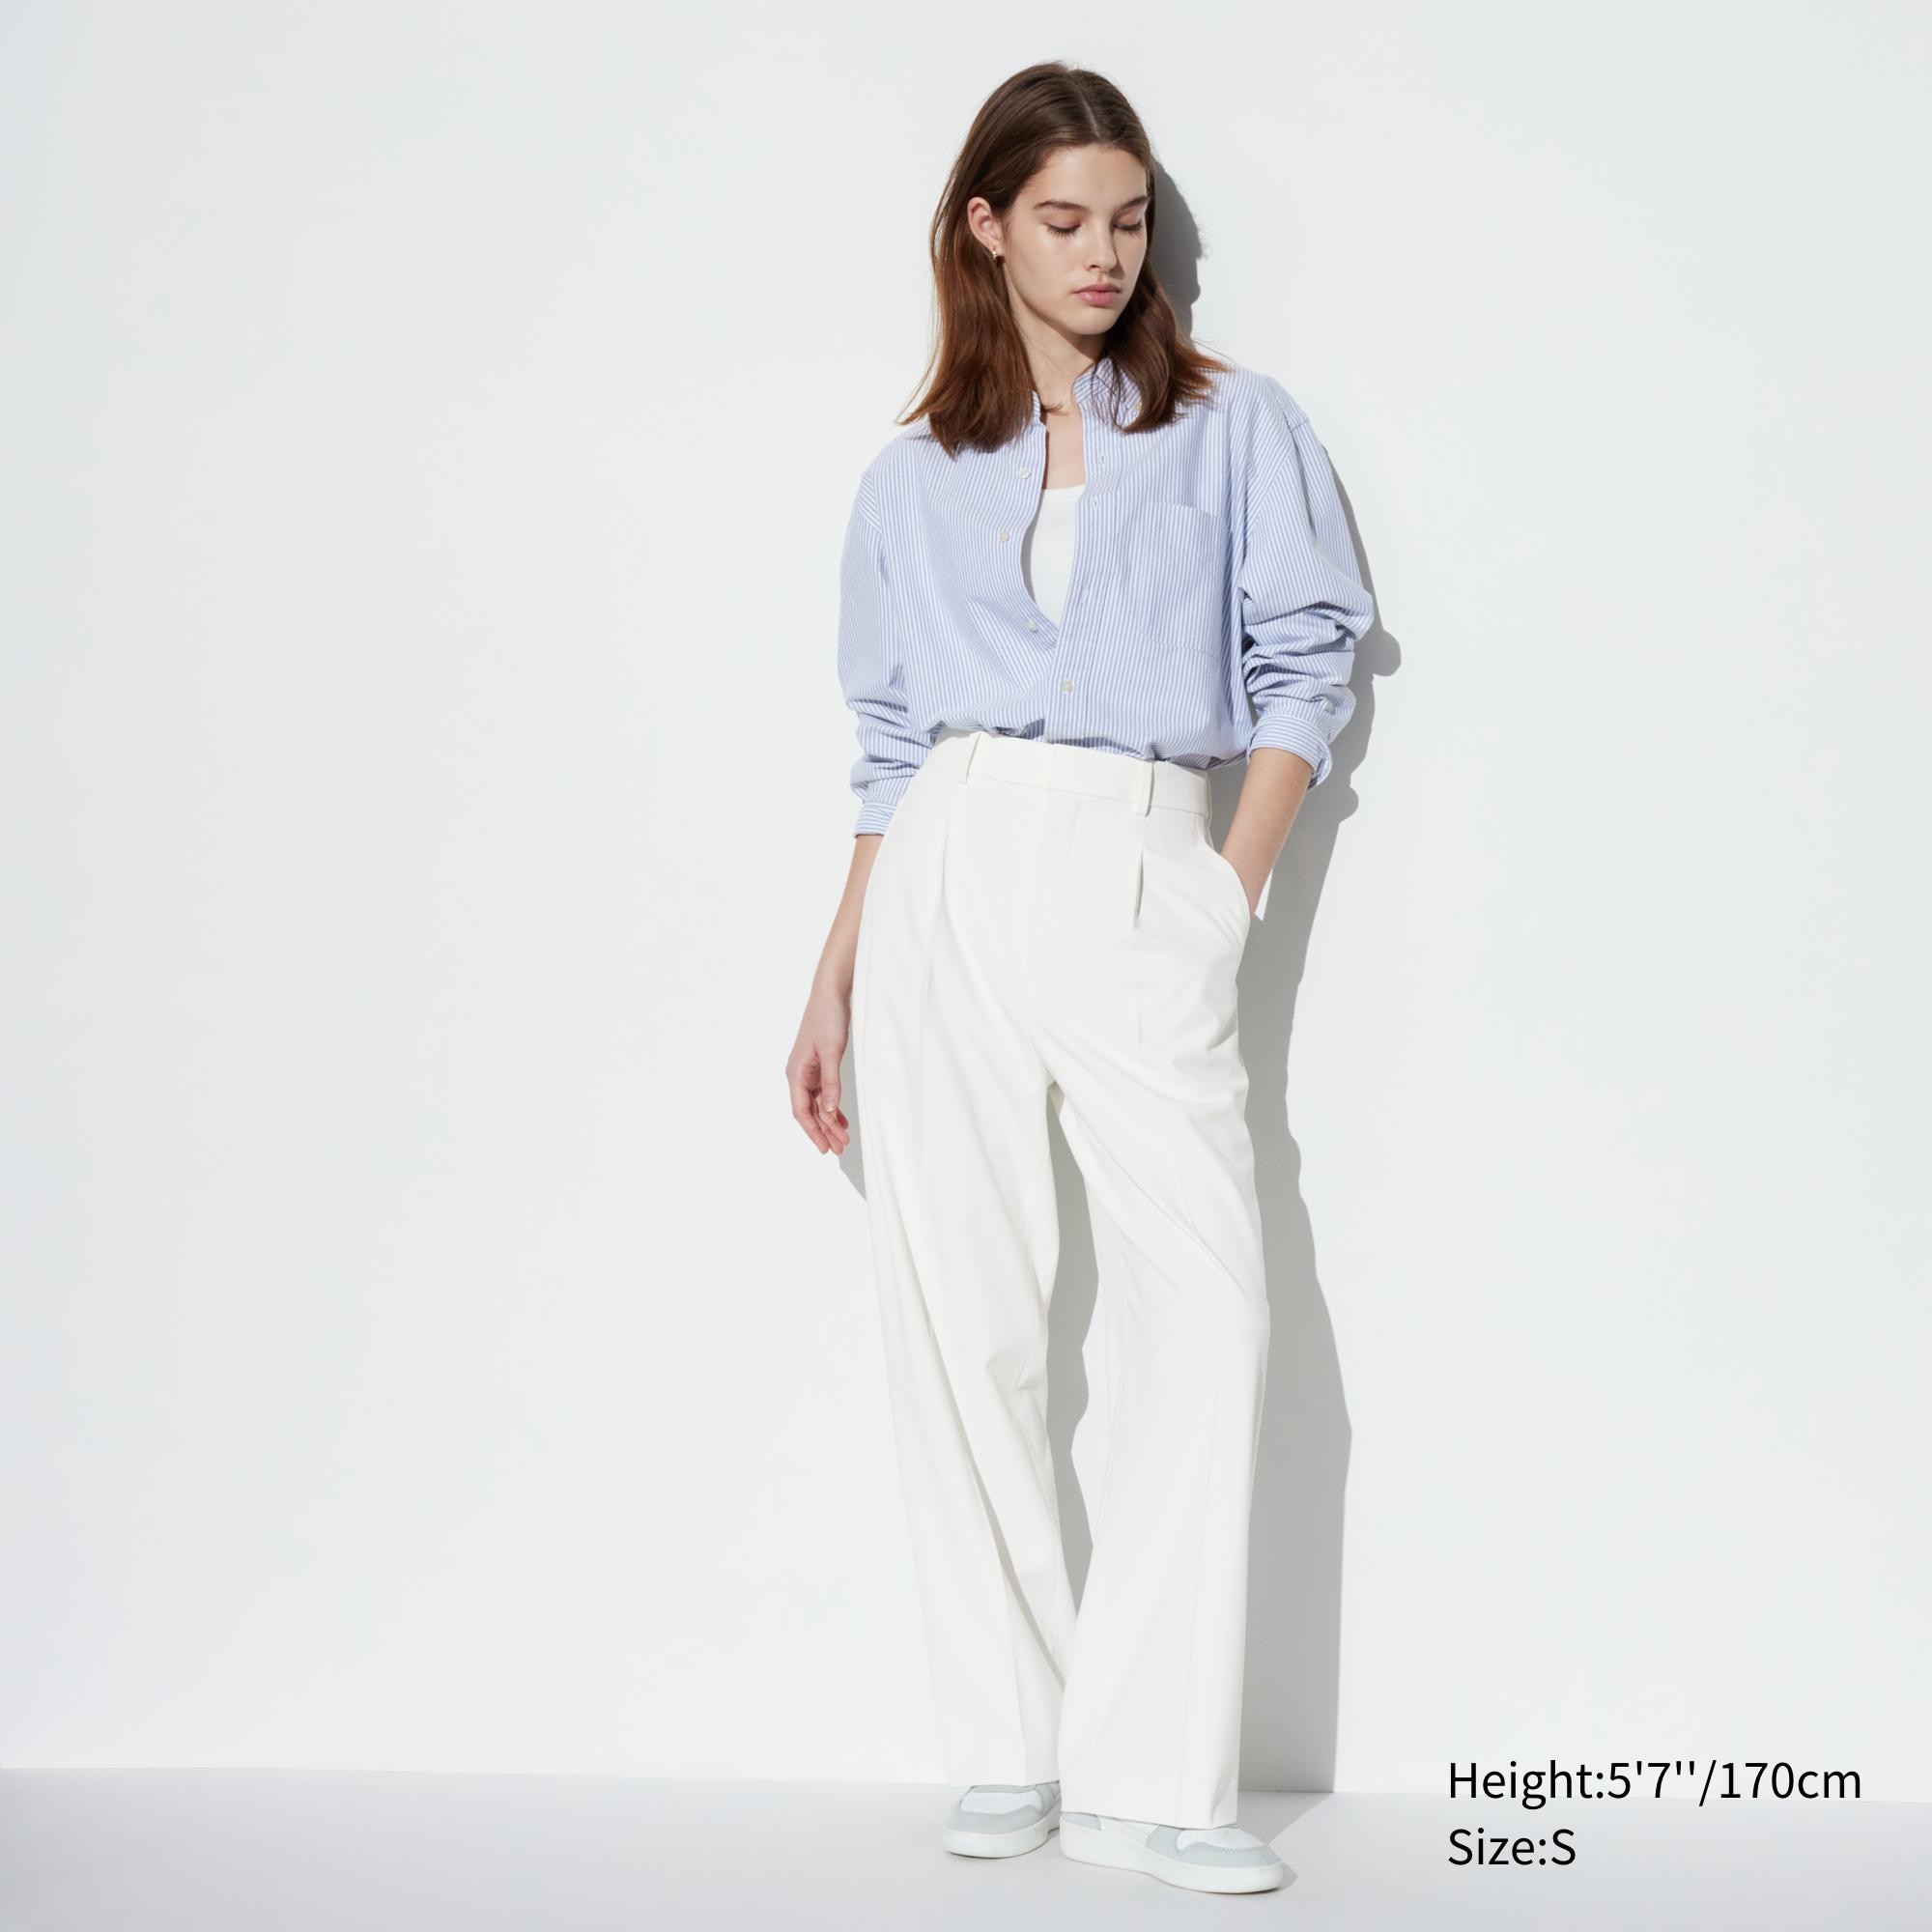 UNIQLO U Belted Pleated Wide Leg Trousers, Where To Buy, 452598-COL09